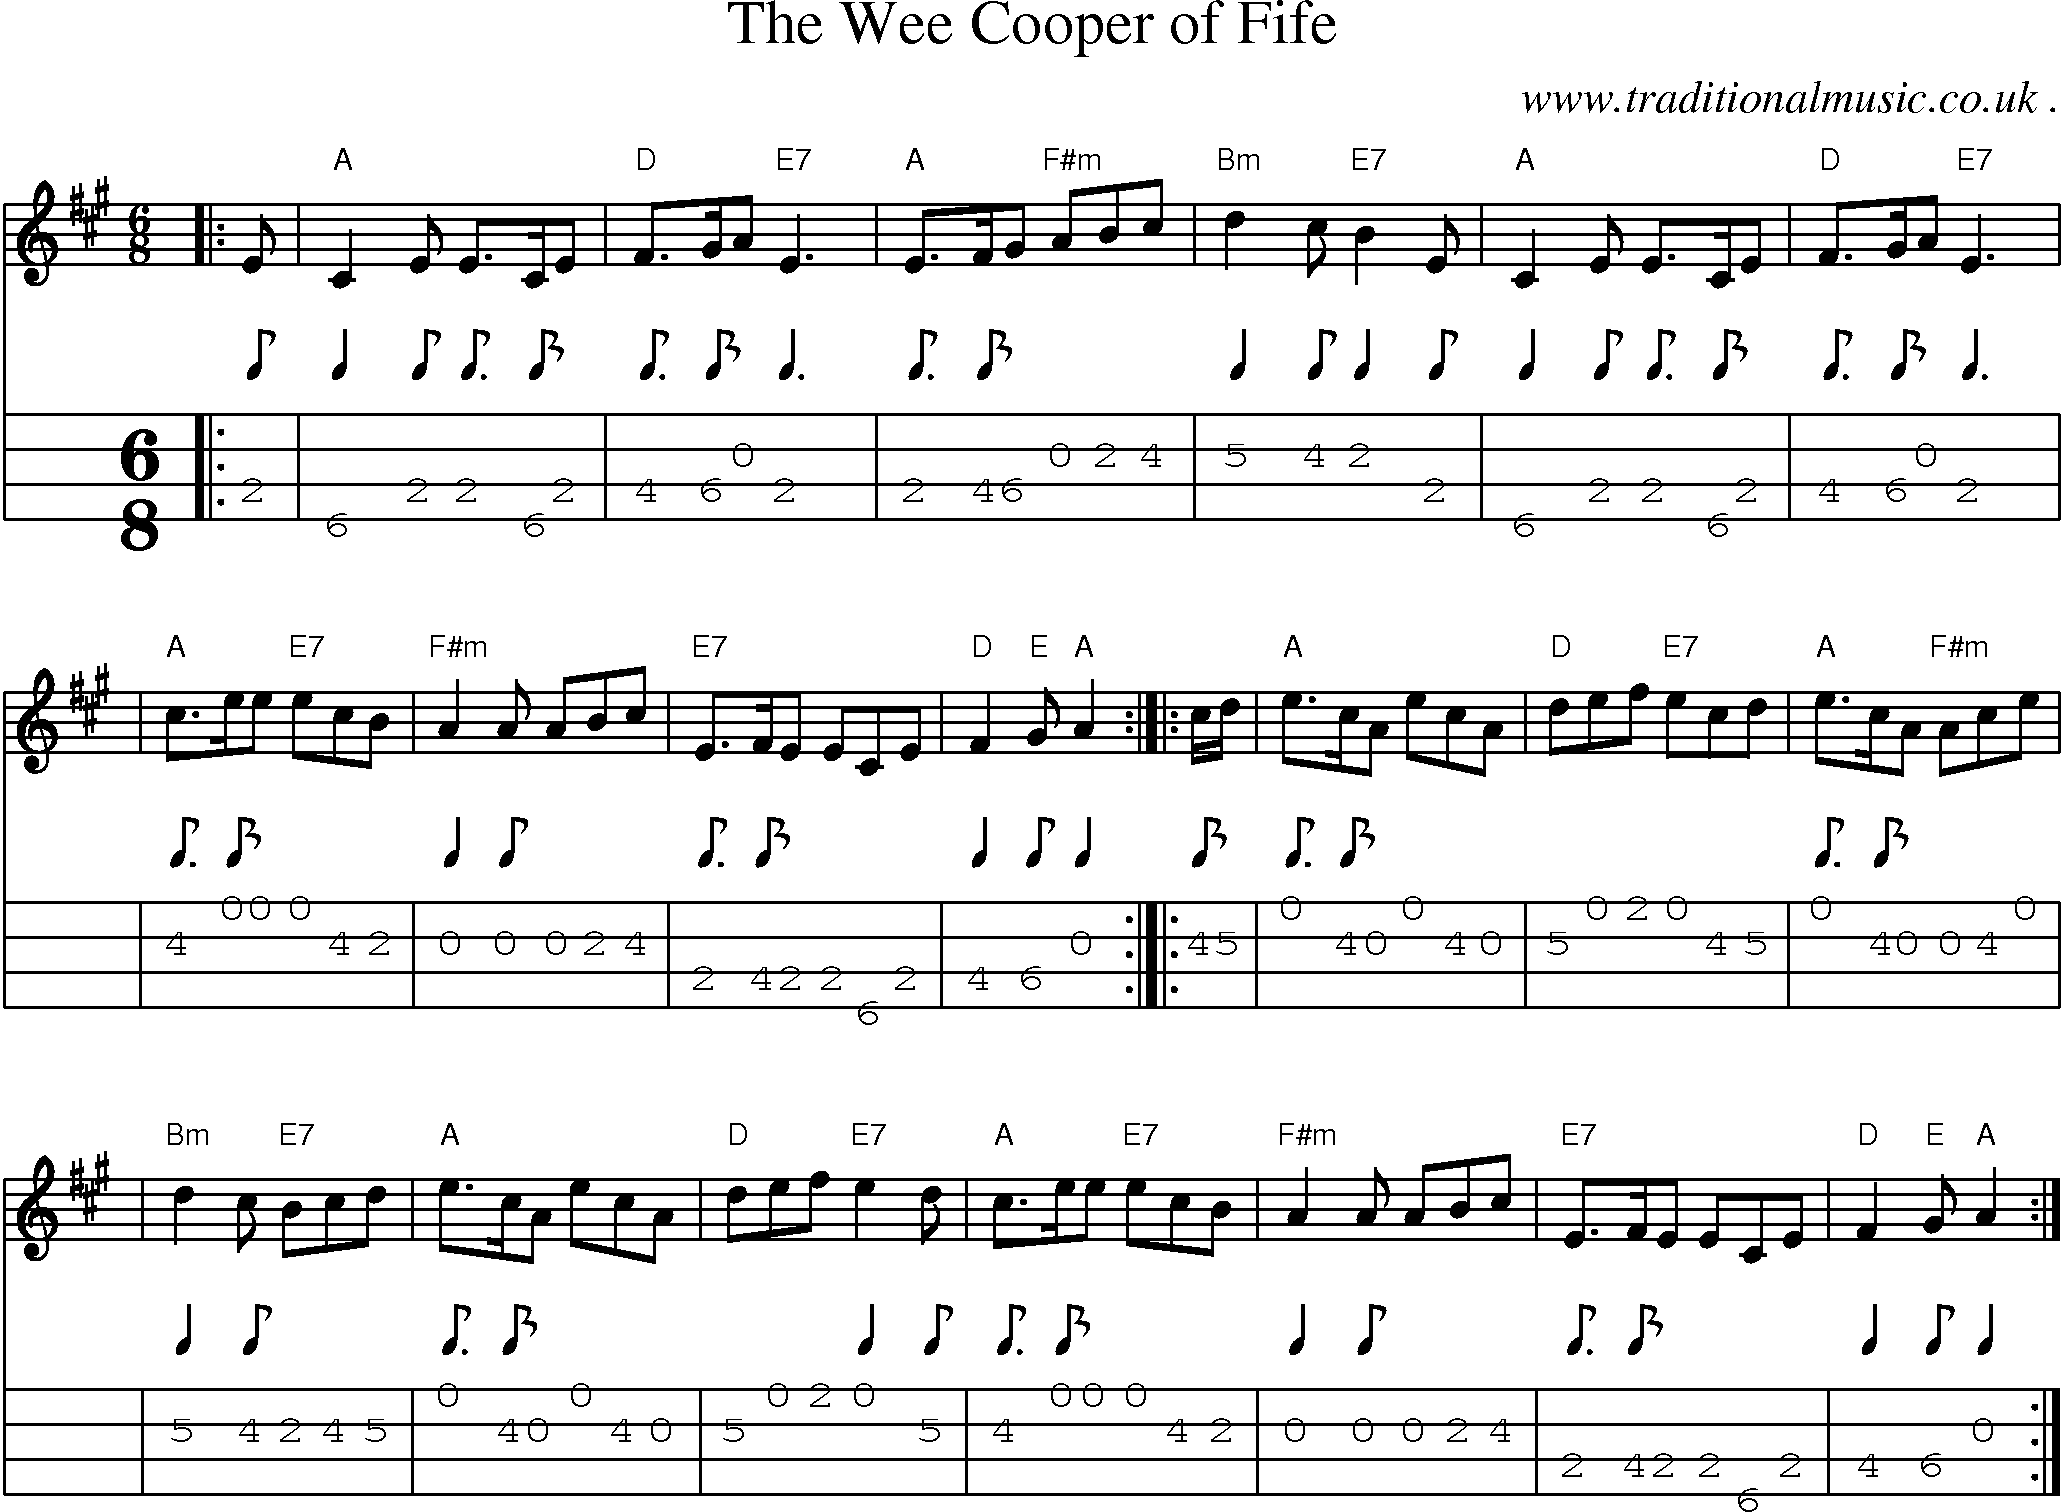 Sheet-music  score, Chords and Mandolin Tabs for The Wee Cooper Of Fife